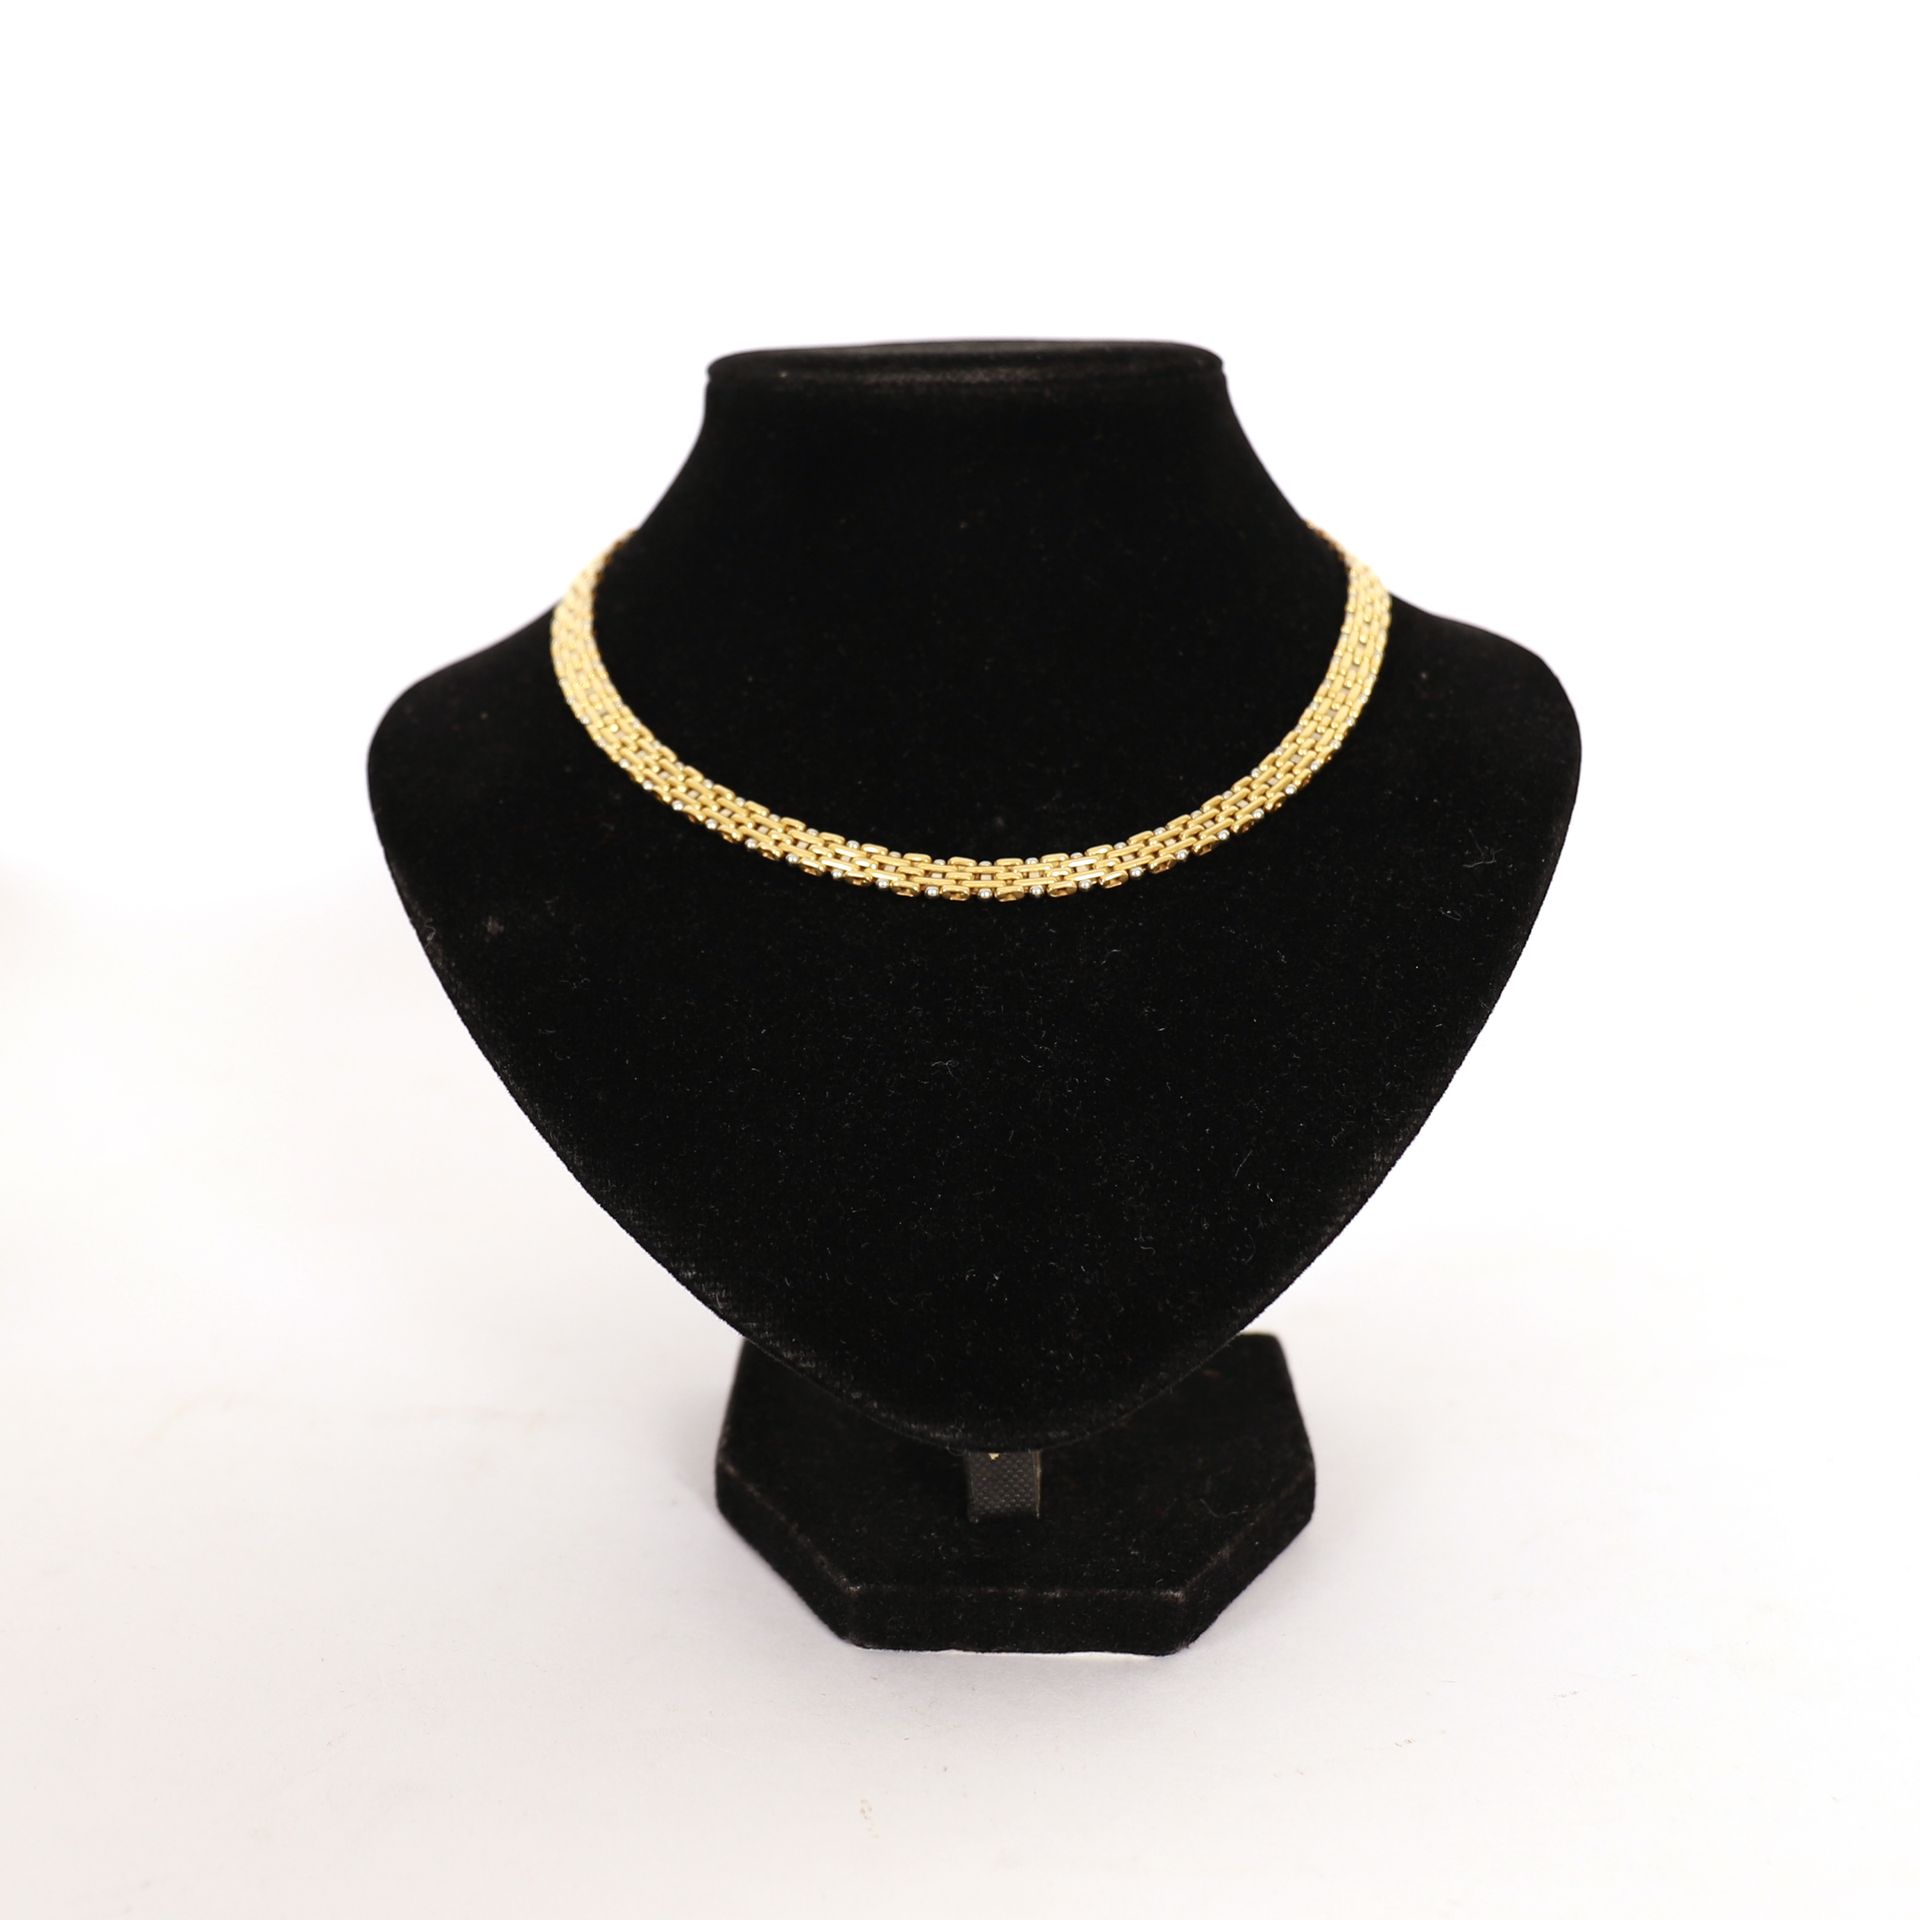 Null GOLD NECKLACE WITH FLAT LINK

L : 42 cm

Weight : 53 grs